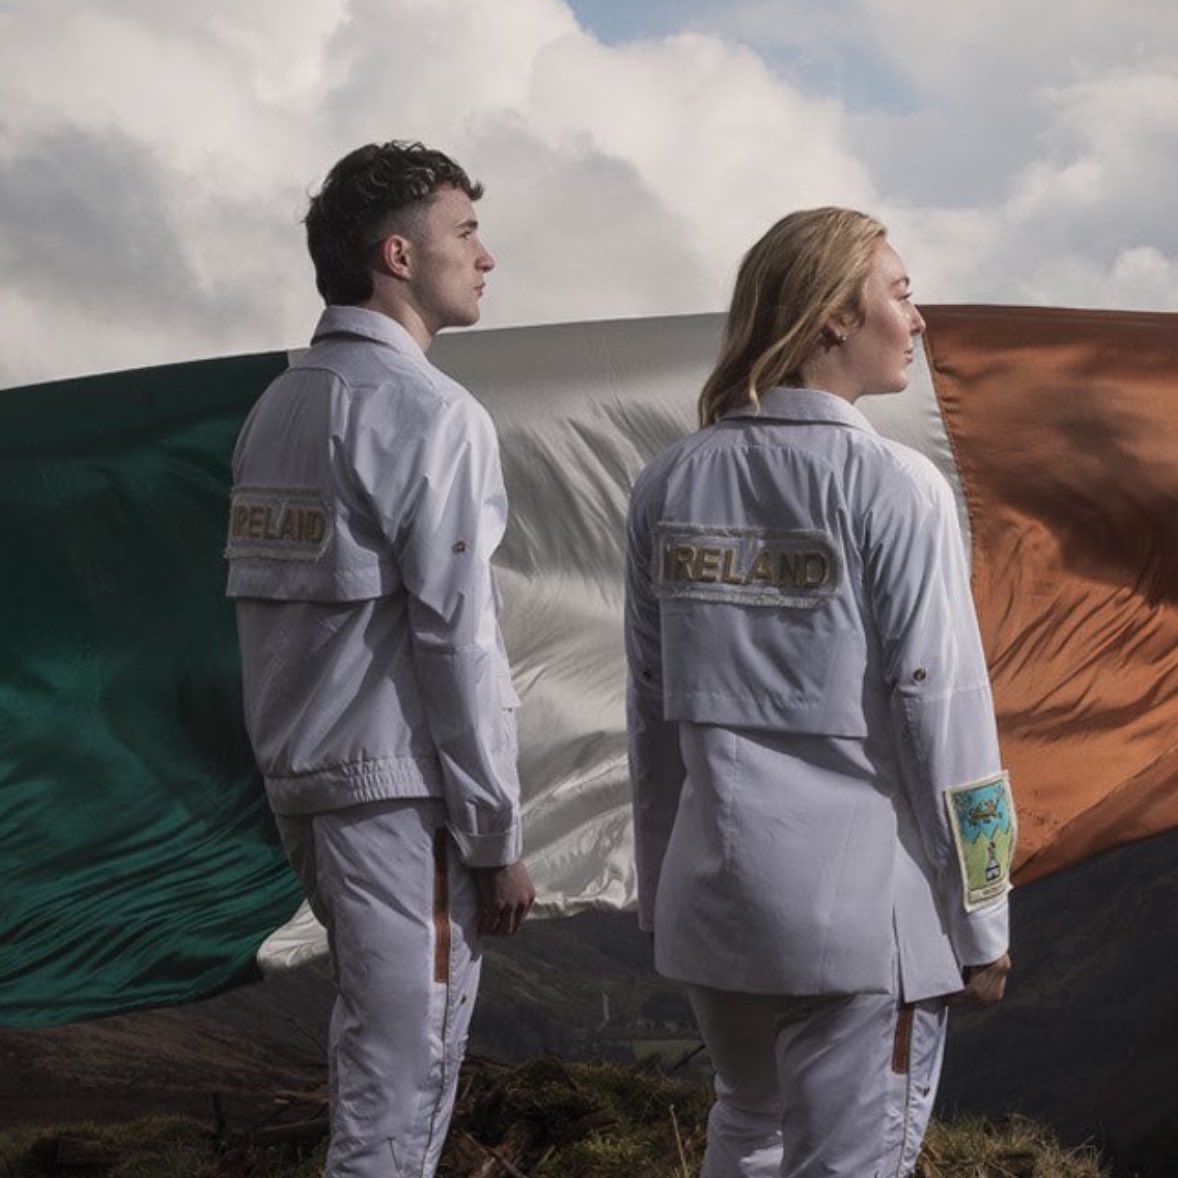 the team ireland outfits for the paris 2024 olympic games opening ceremony. 

when you’re a stenaline captain on shift but have judo practice at 6.